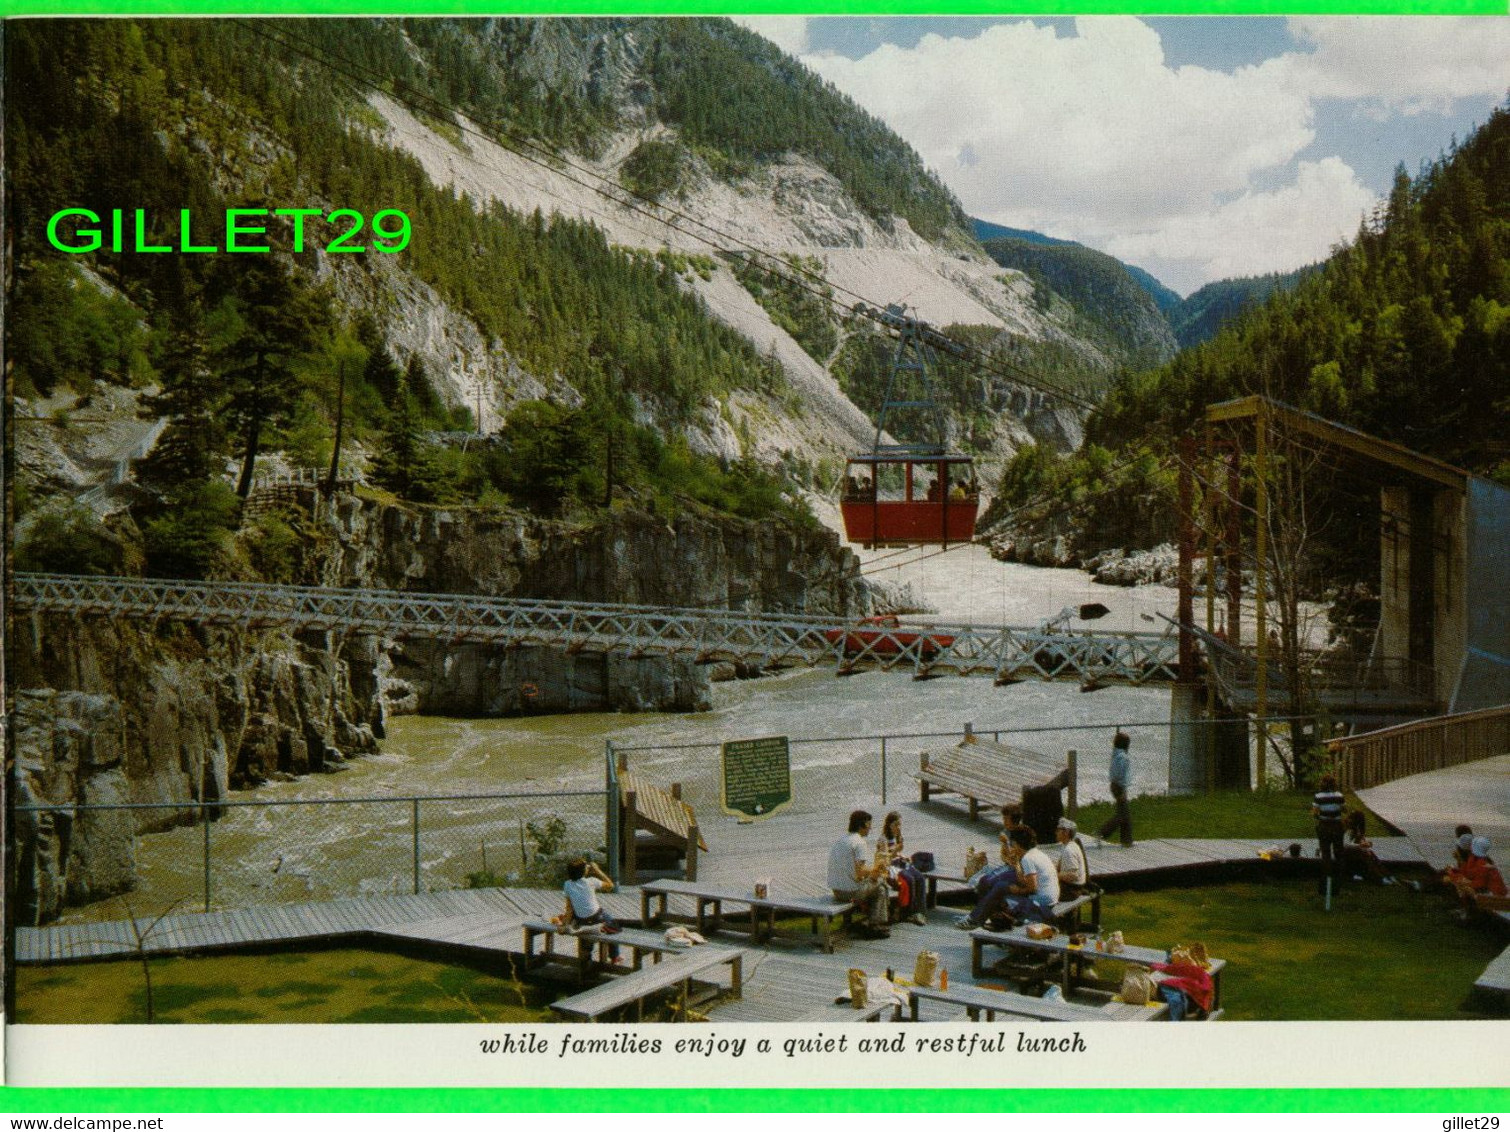 A SOUVENUR ALBUM OF HELL'S GATE AIRTRAM, FRASER CANYON, BC IN 1978 - 20 PAGES - - Amérique Du Nord